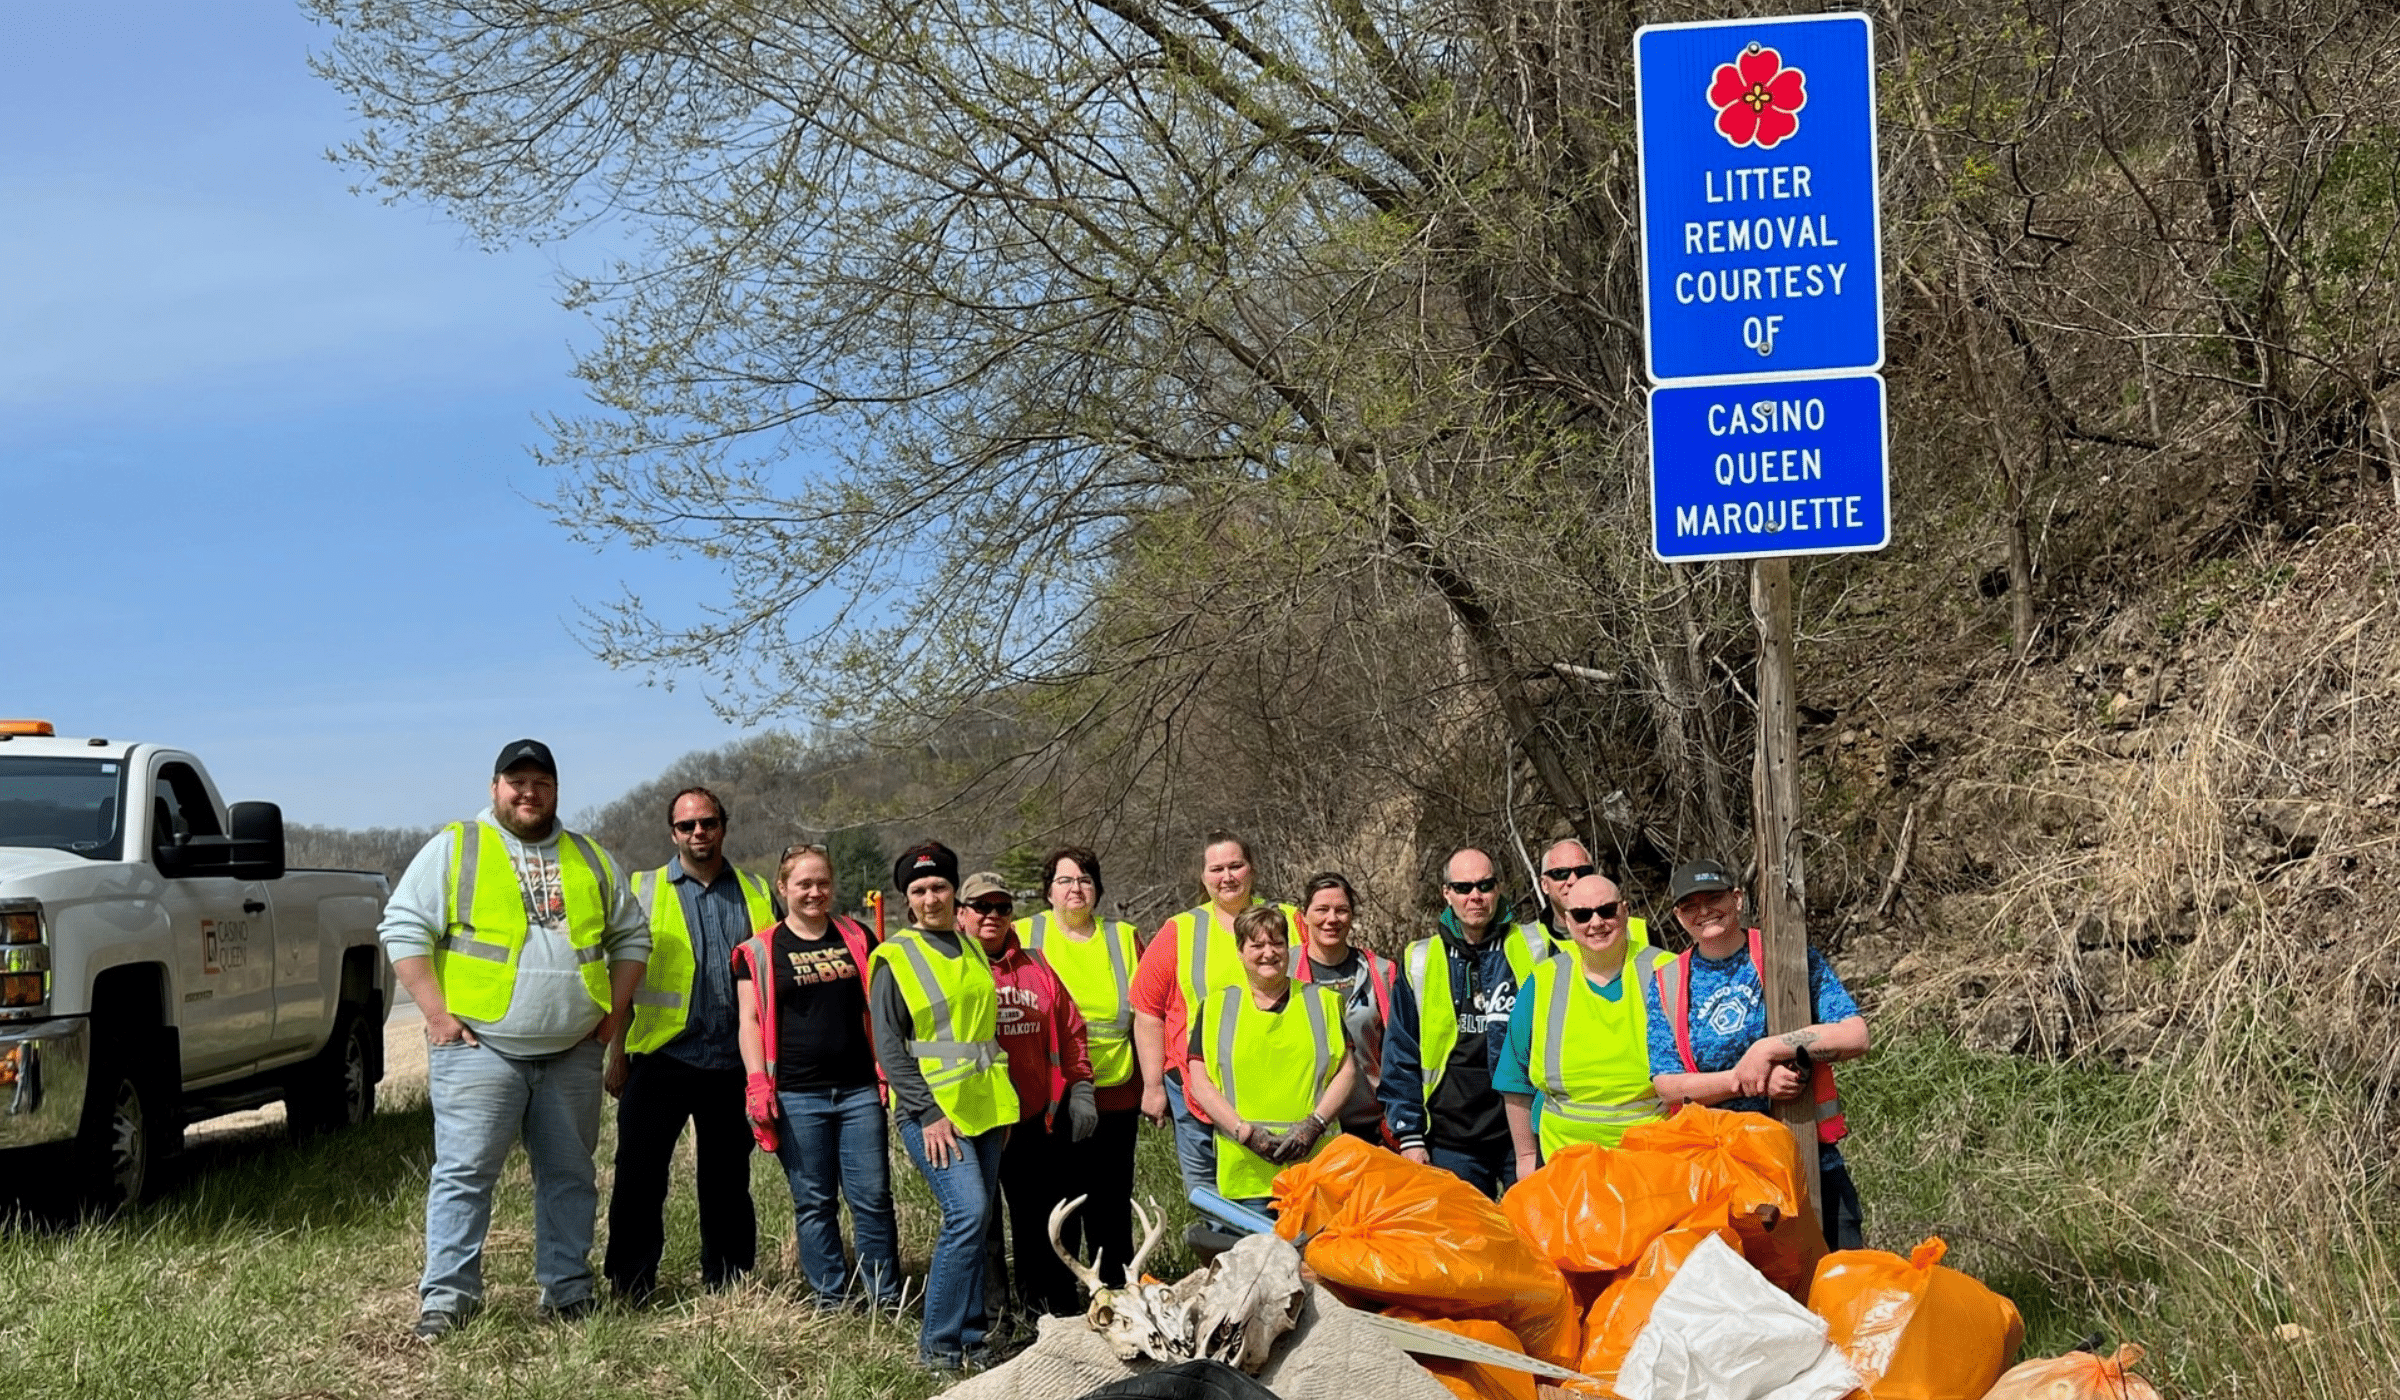 Group shot of Casino Queen Marquette team members standing with their picked up litter. Sign reads "Litter removal courtesy of Casino Queen Marquette"